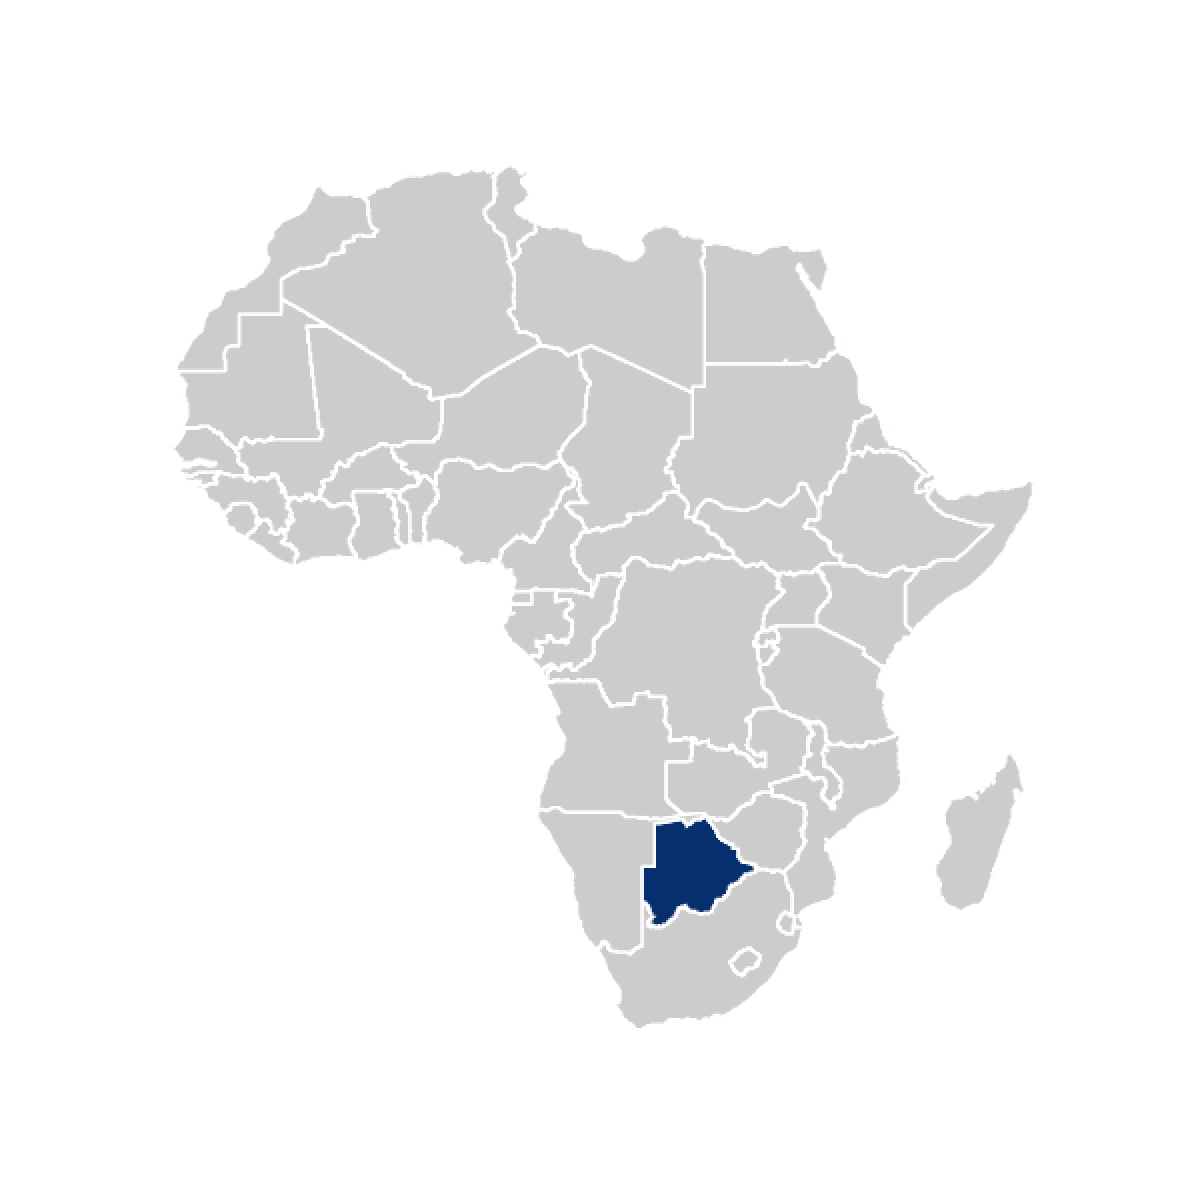 Botswana highlighted in map of Africa